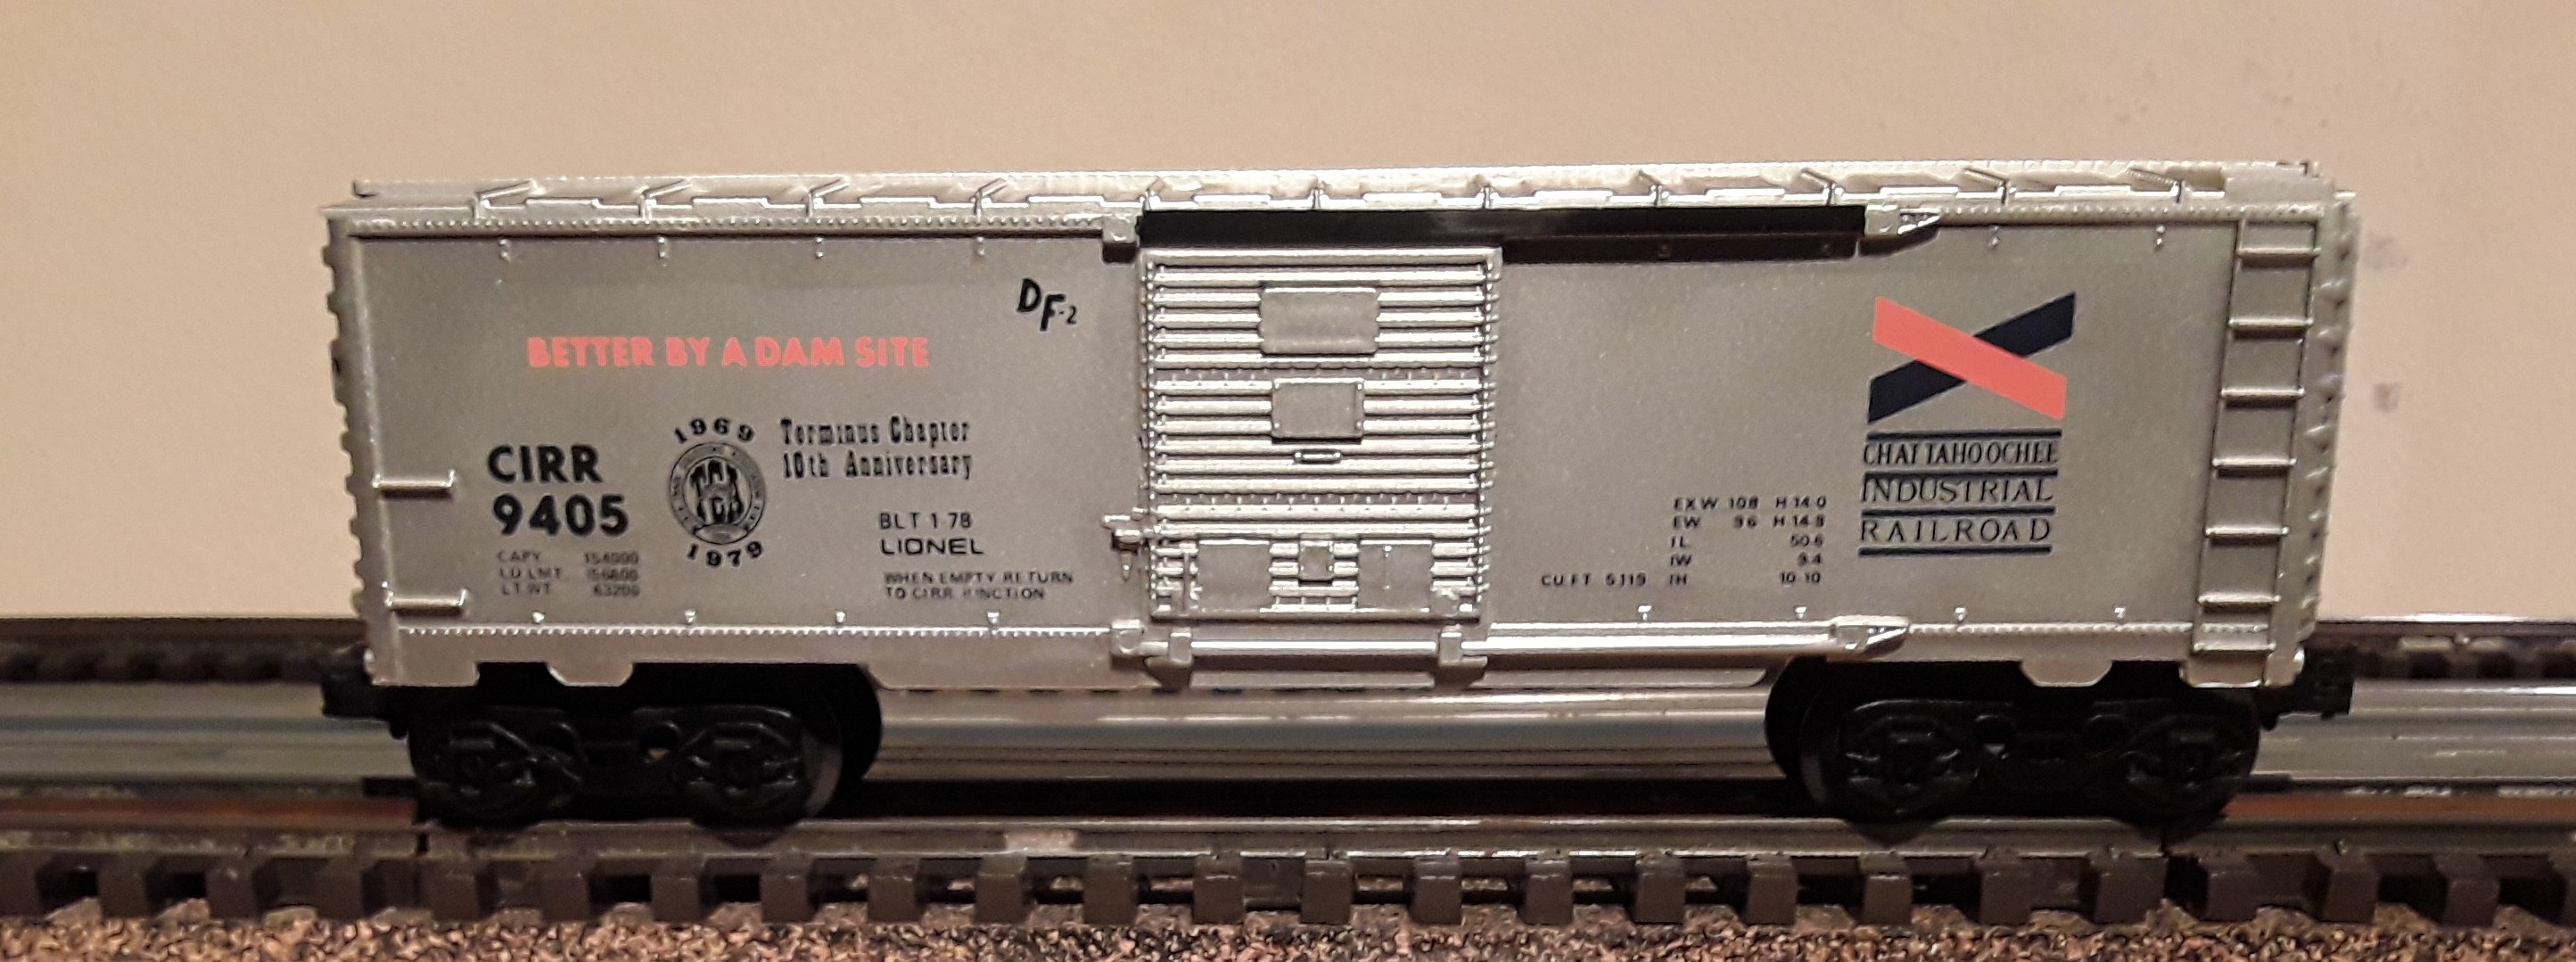 Lionel Modern 6-9287 Southern N5c Illuminated Caboose for sale online 